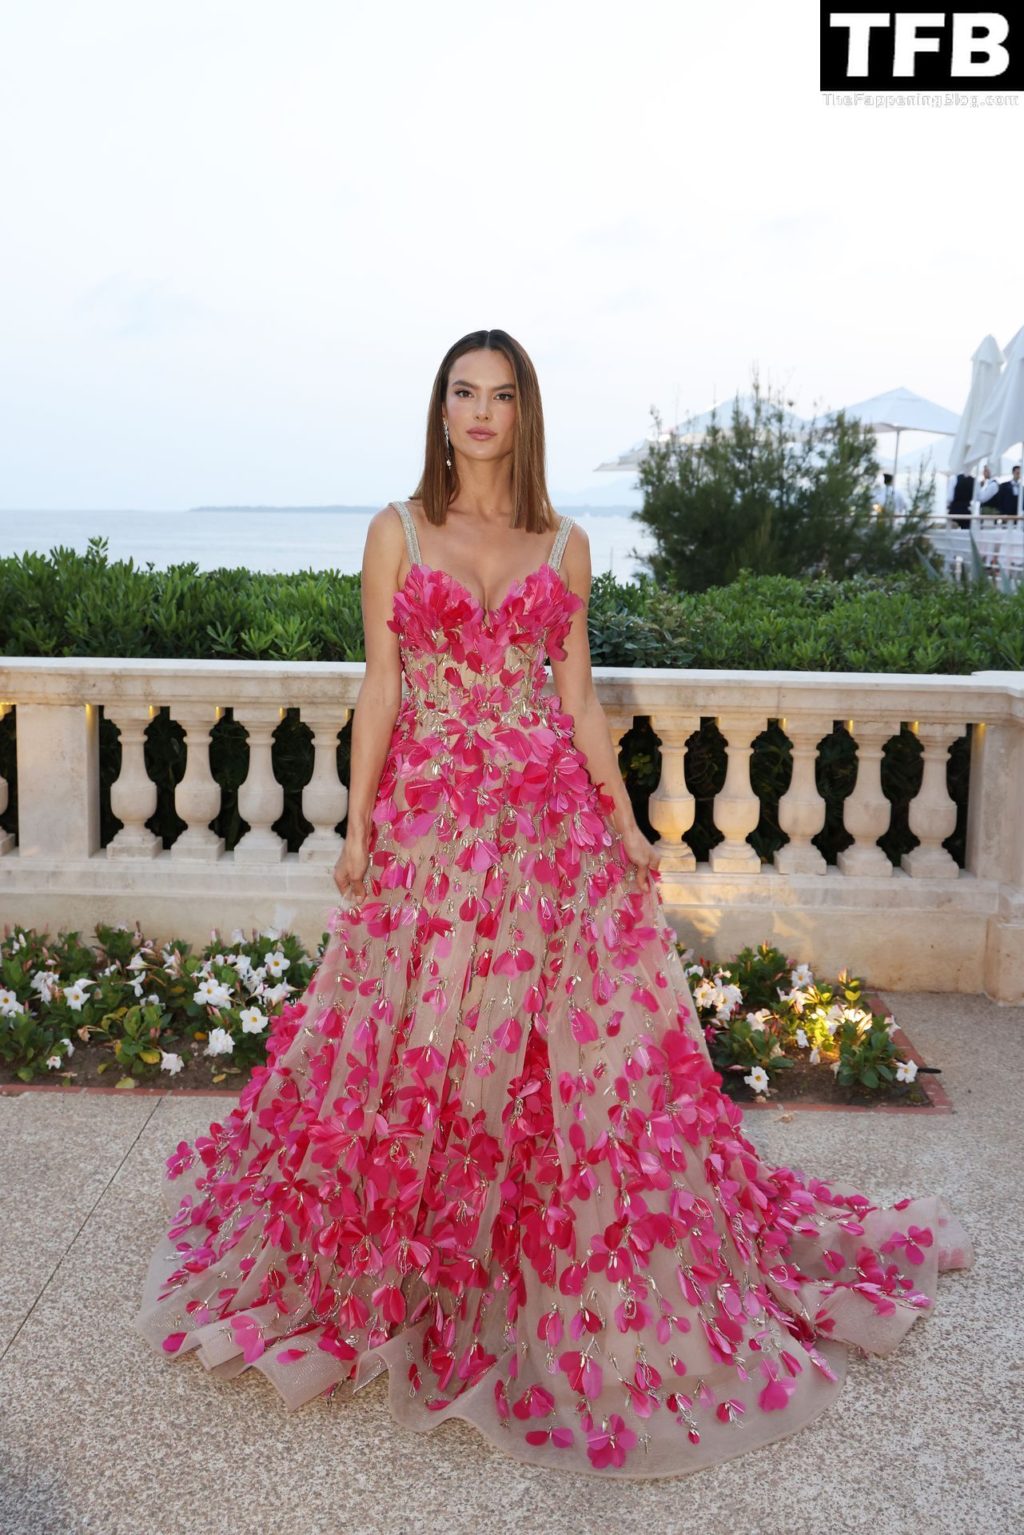 Alessandra Ambrosio Looks Stunning at the Celebration Of Women In Cinema Gala in Cap d’Antibes (22 Photos)